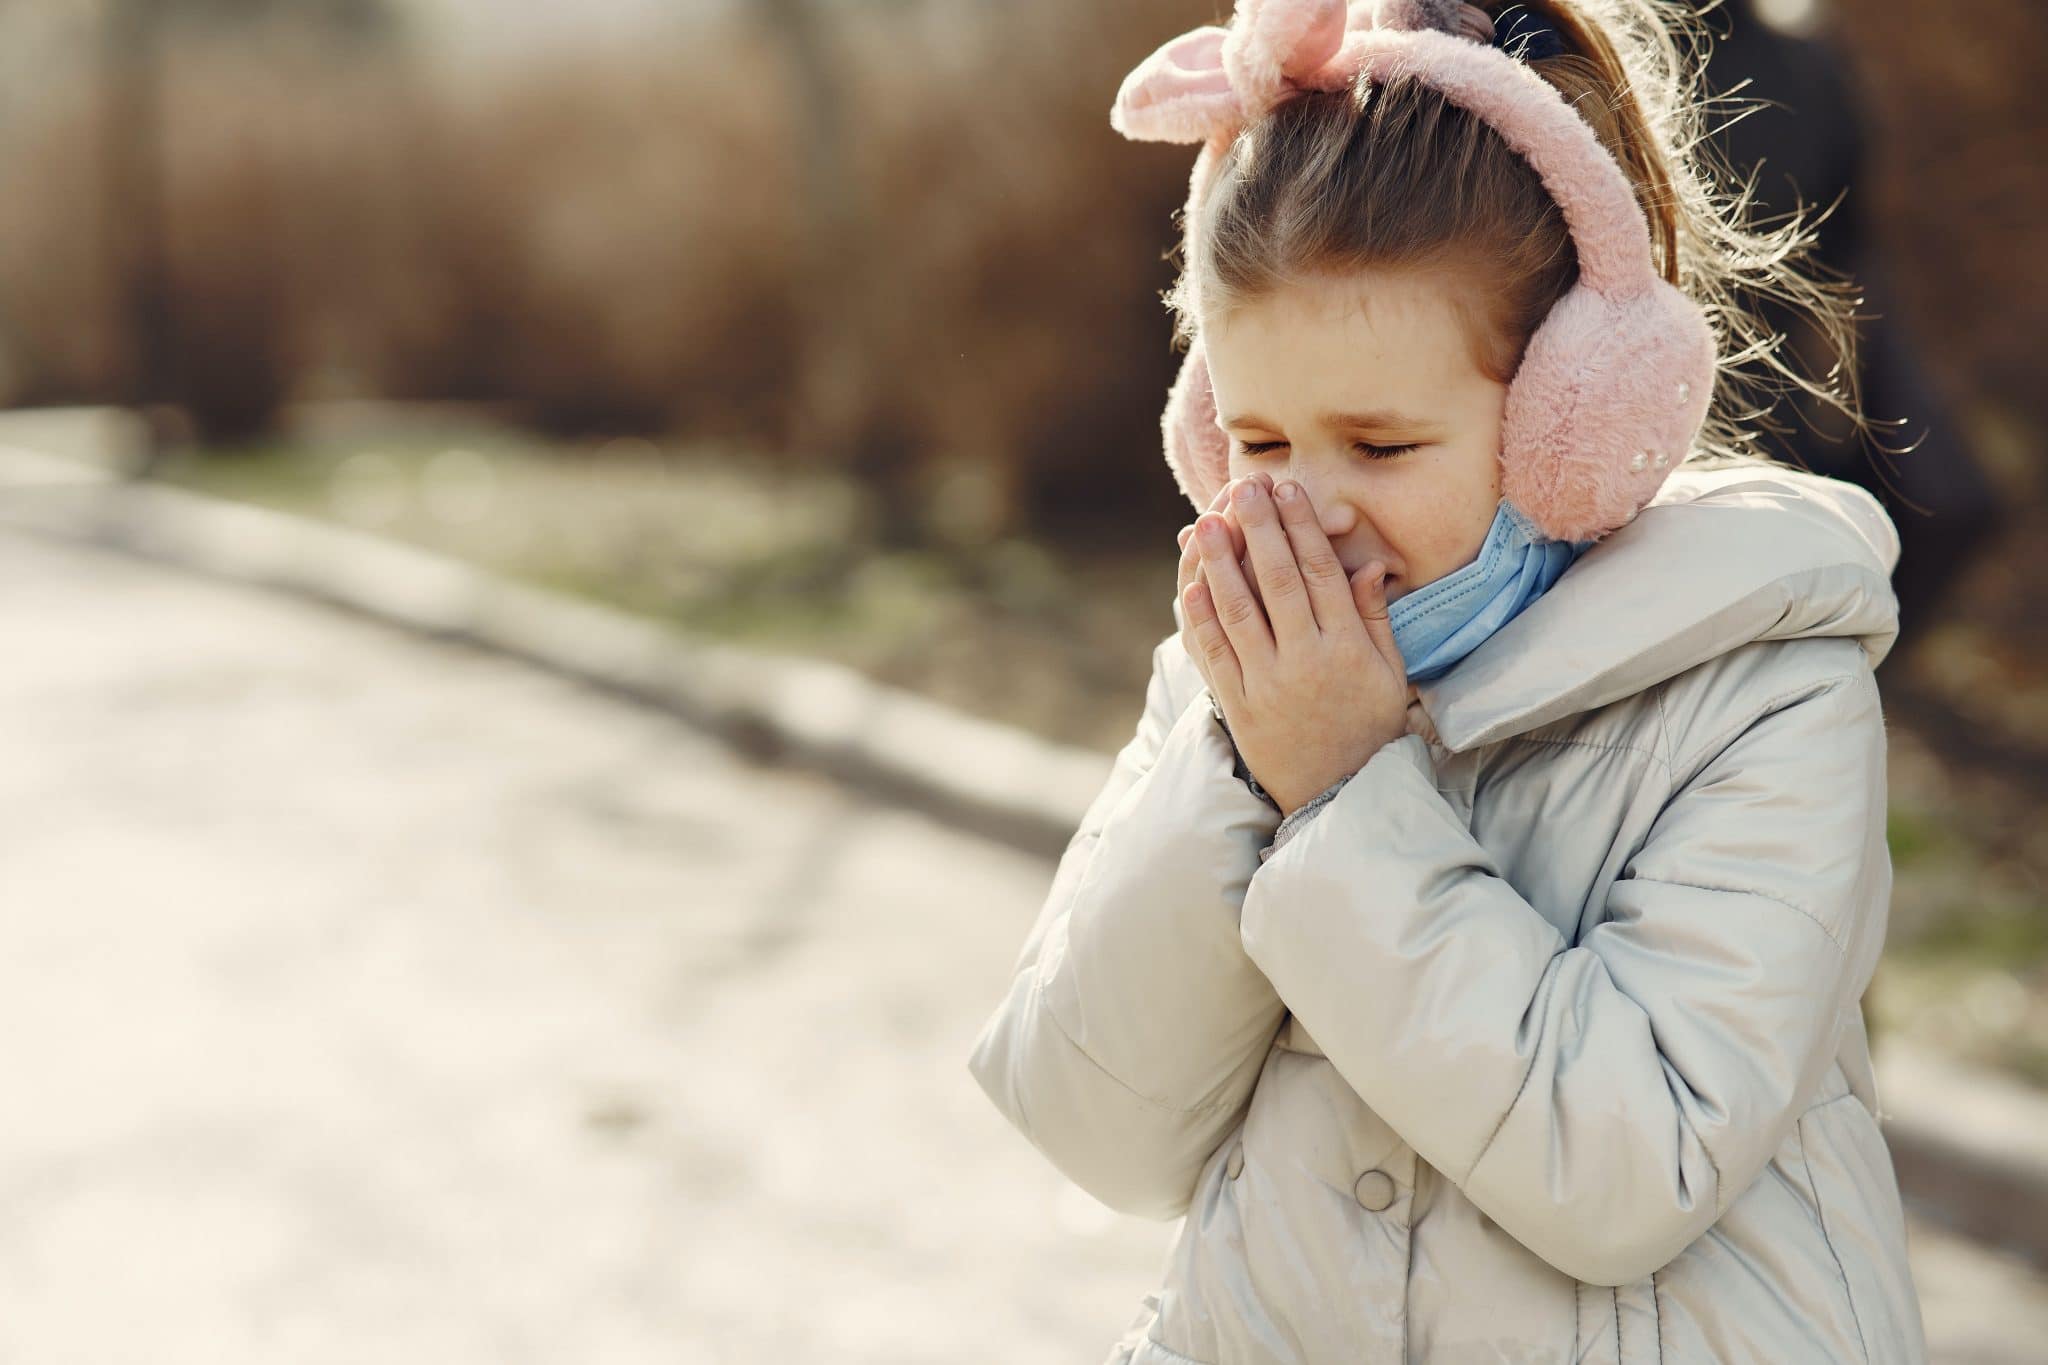 Child covering her nose with her hands.